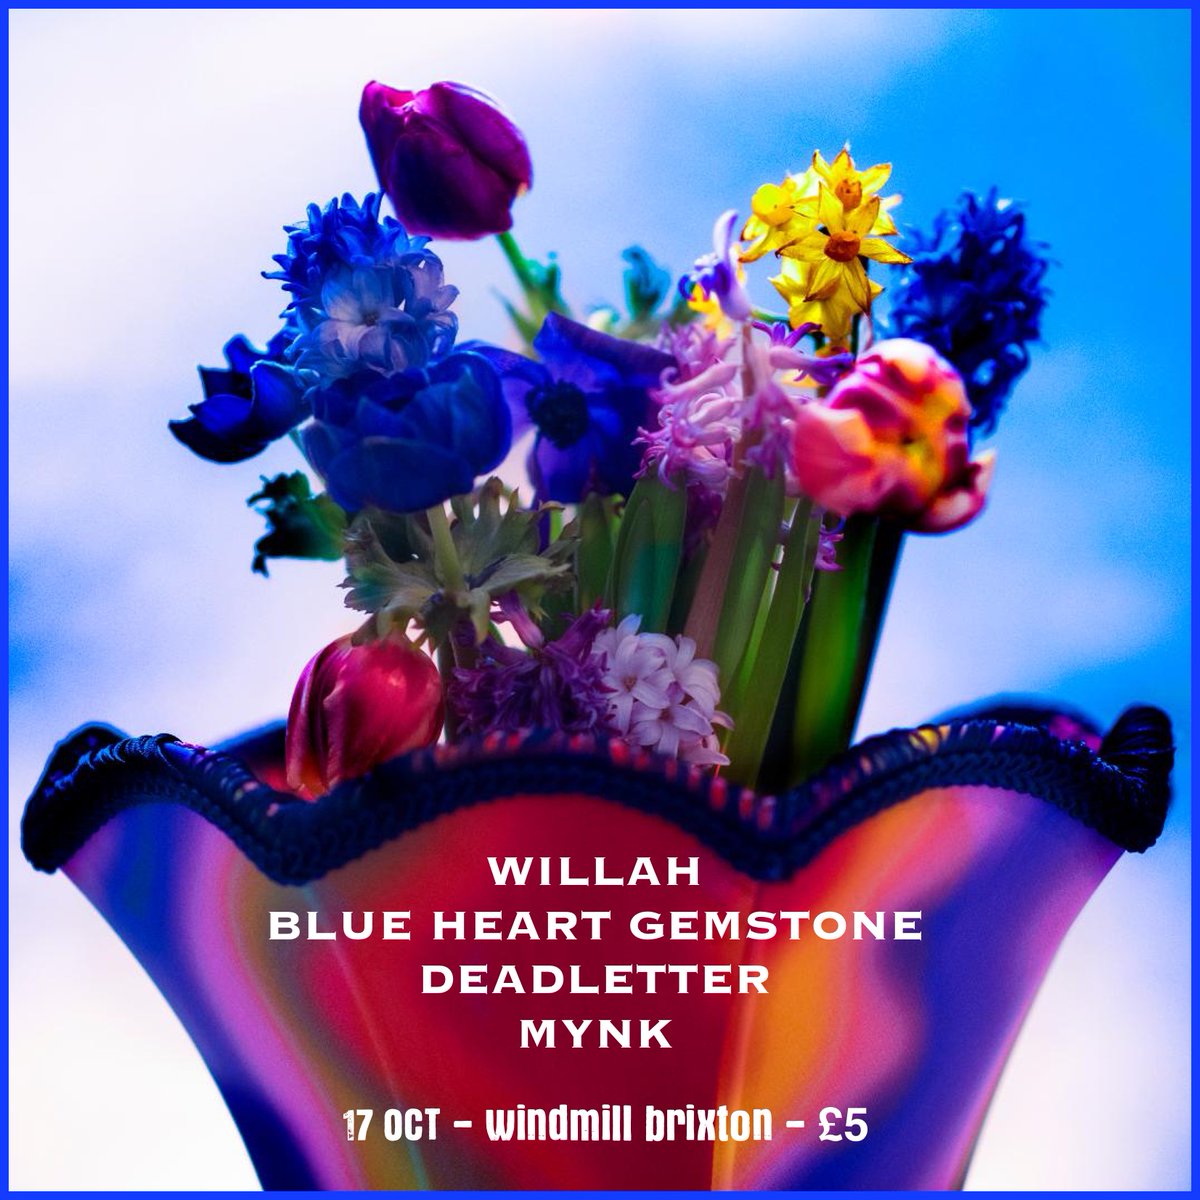 Stagetimes tonight: 8pm MYNK 845 @_DEADLETTER - surprise tour warm-up show!! 935 Blue Heart Gemstone (Trail Shift) 1015 Willah